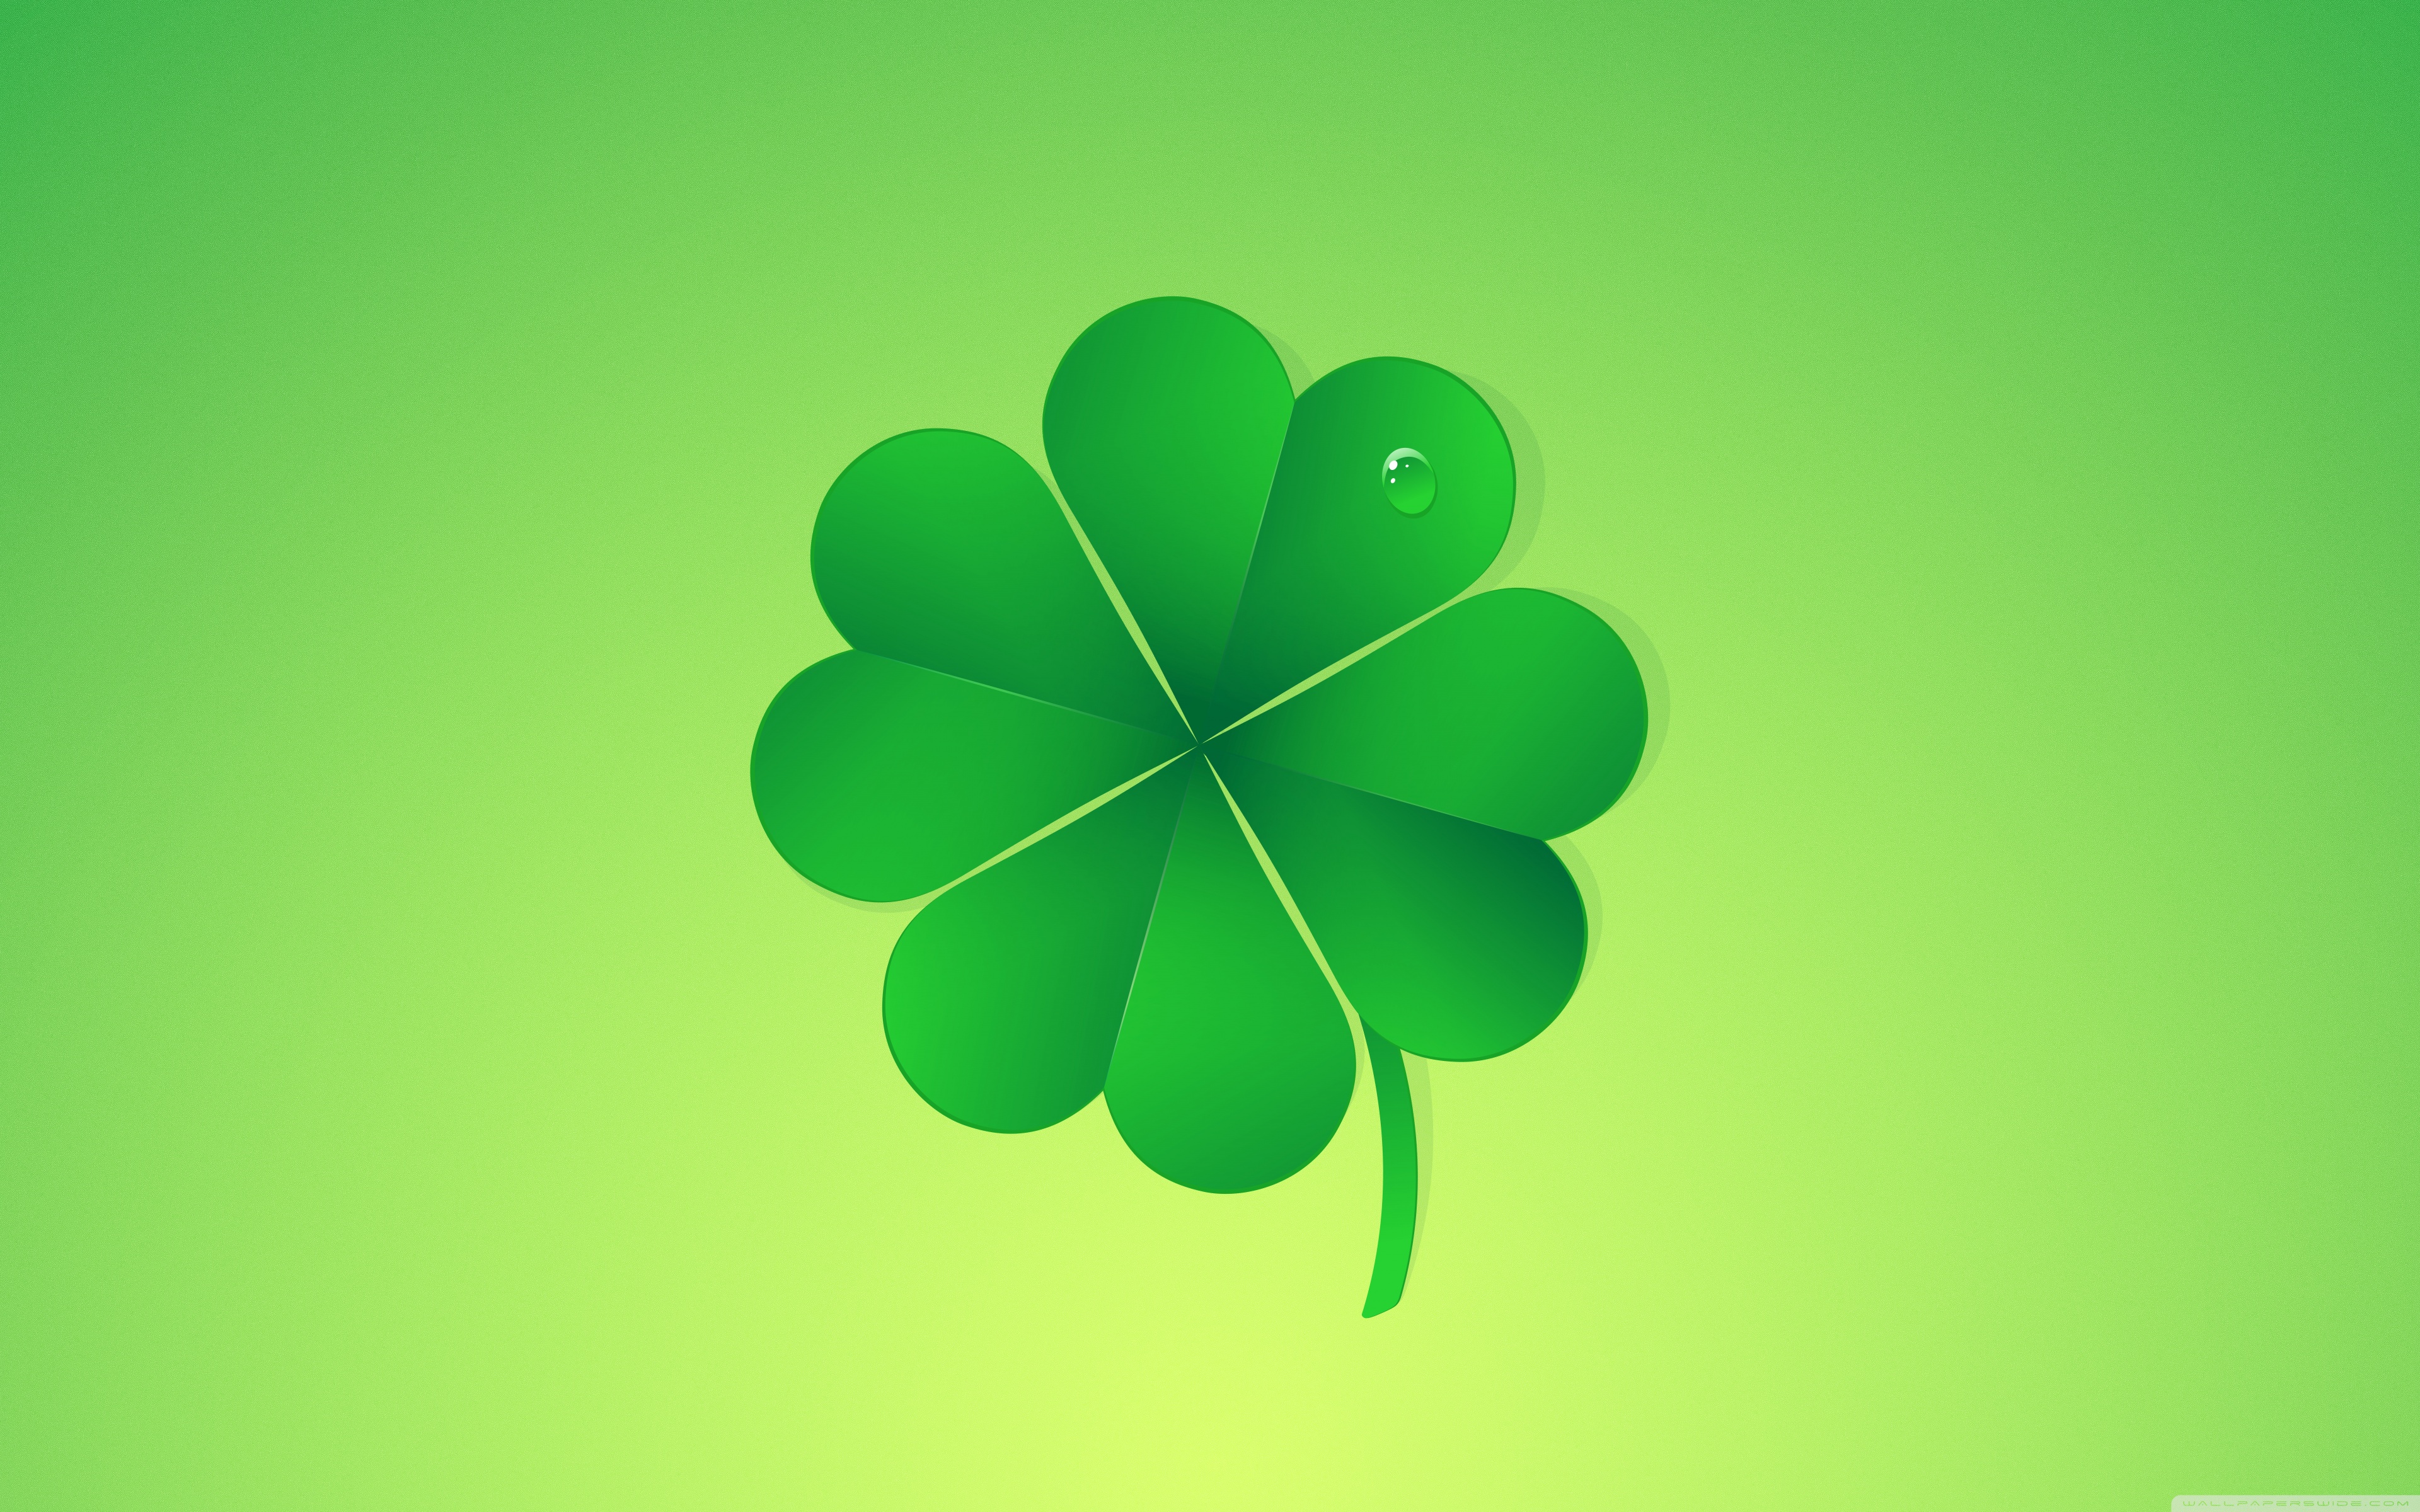 HD wallpaper klee four leaf clover green lucky charm pointed flower   Wallpaper Flare